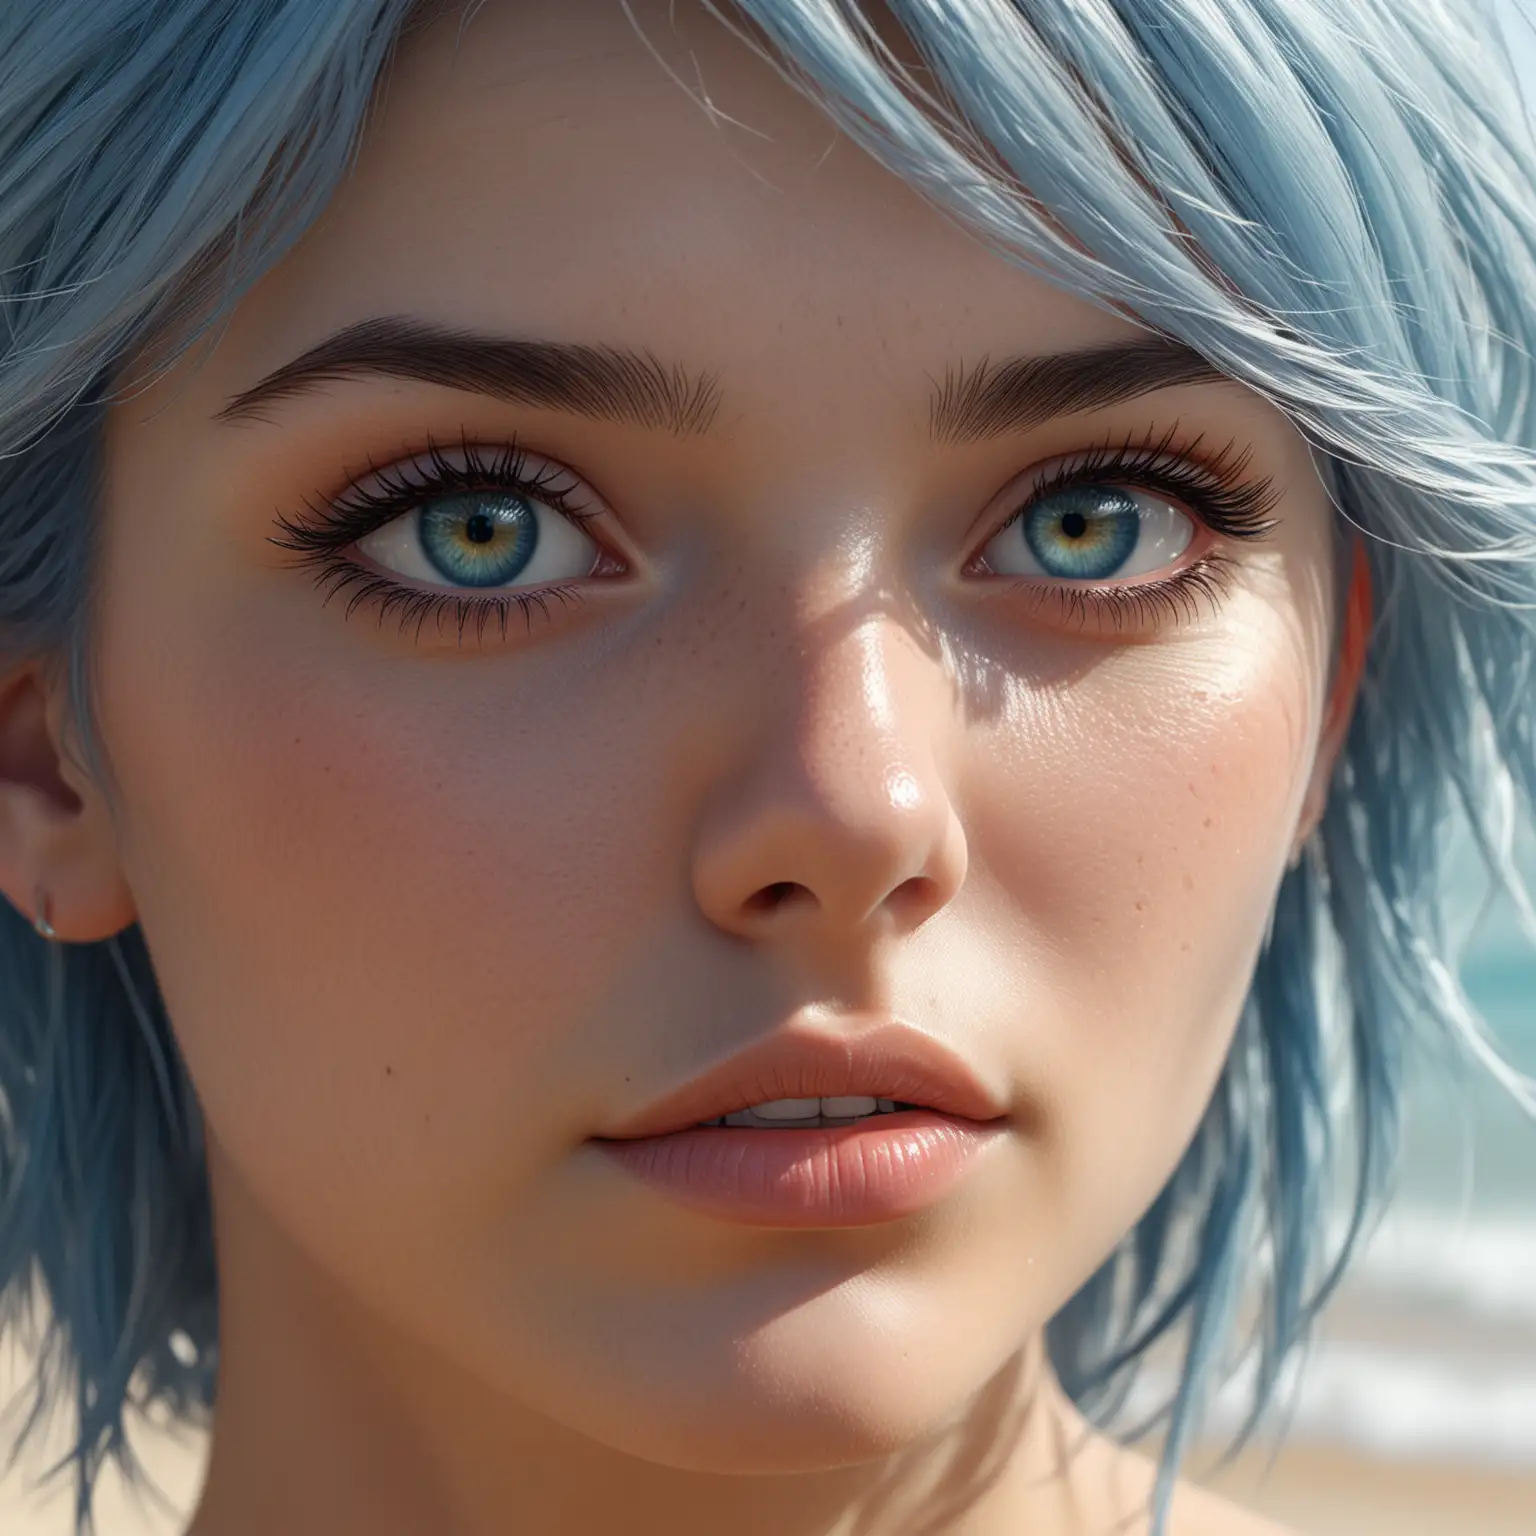 Hyper Realistic Beach Portrait Stunning Woman with Blue Hair and Gray Eyes